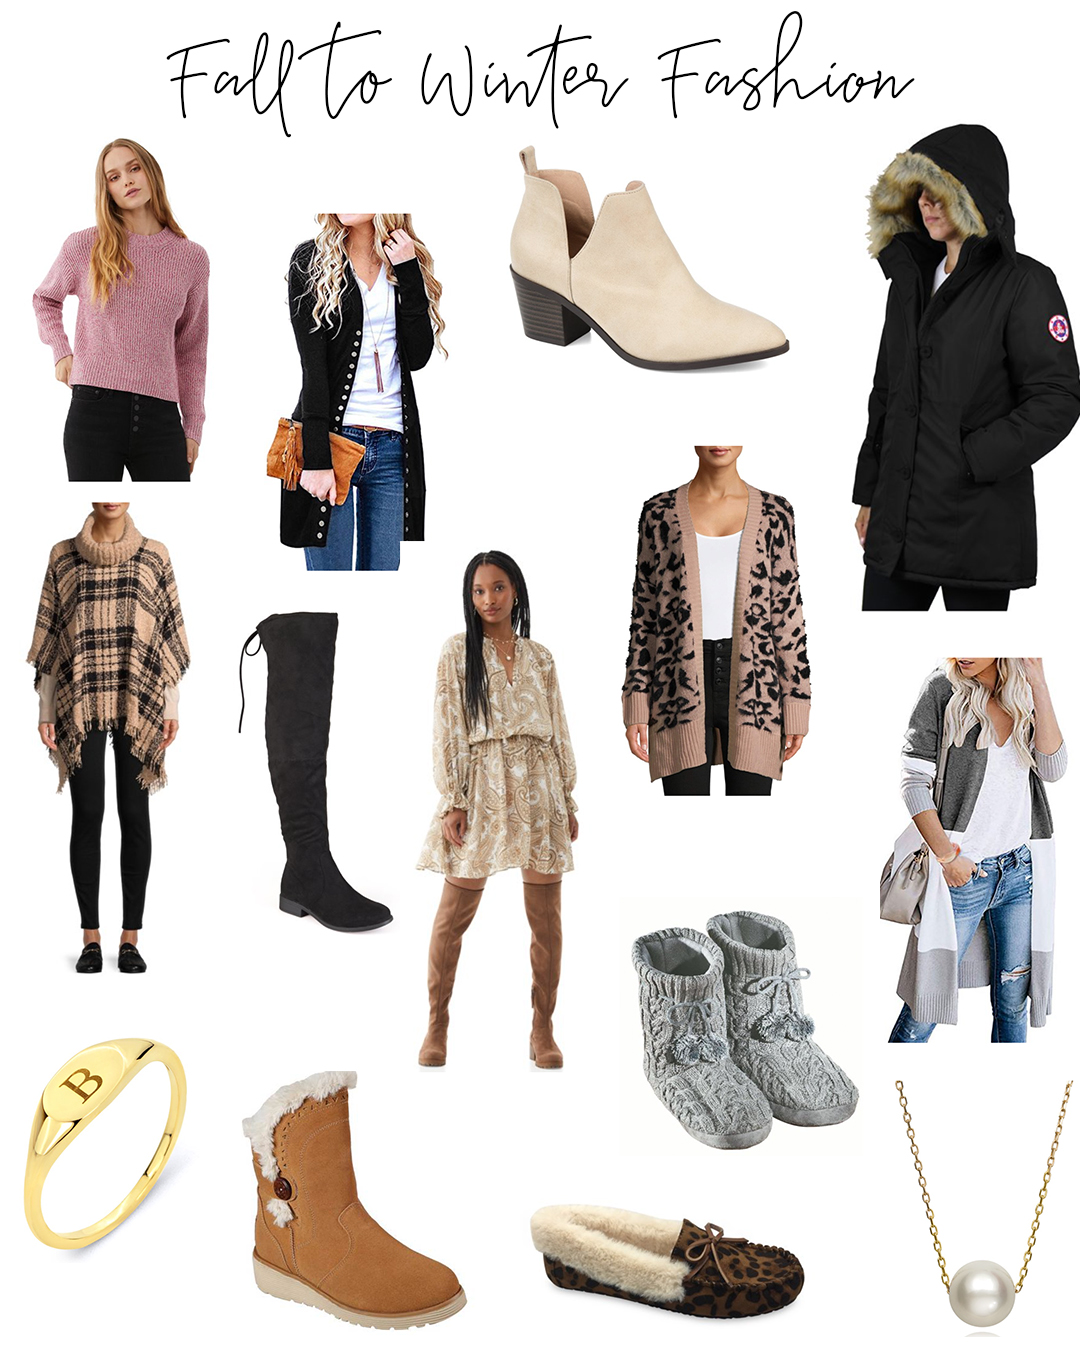 November & December 2020 Fashion Ideas - Affordable & Trendy Winter Wear to order as gifts or for youself. Jackets, accessories, tops and more! 